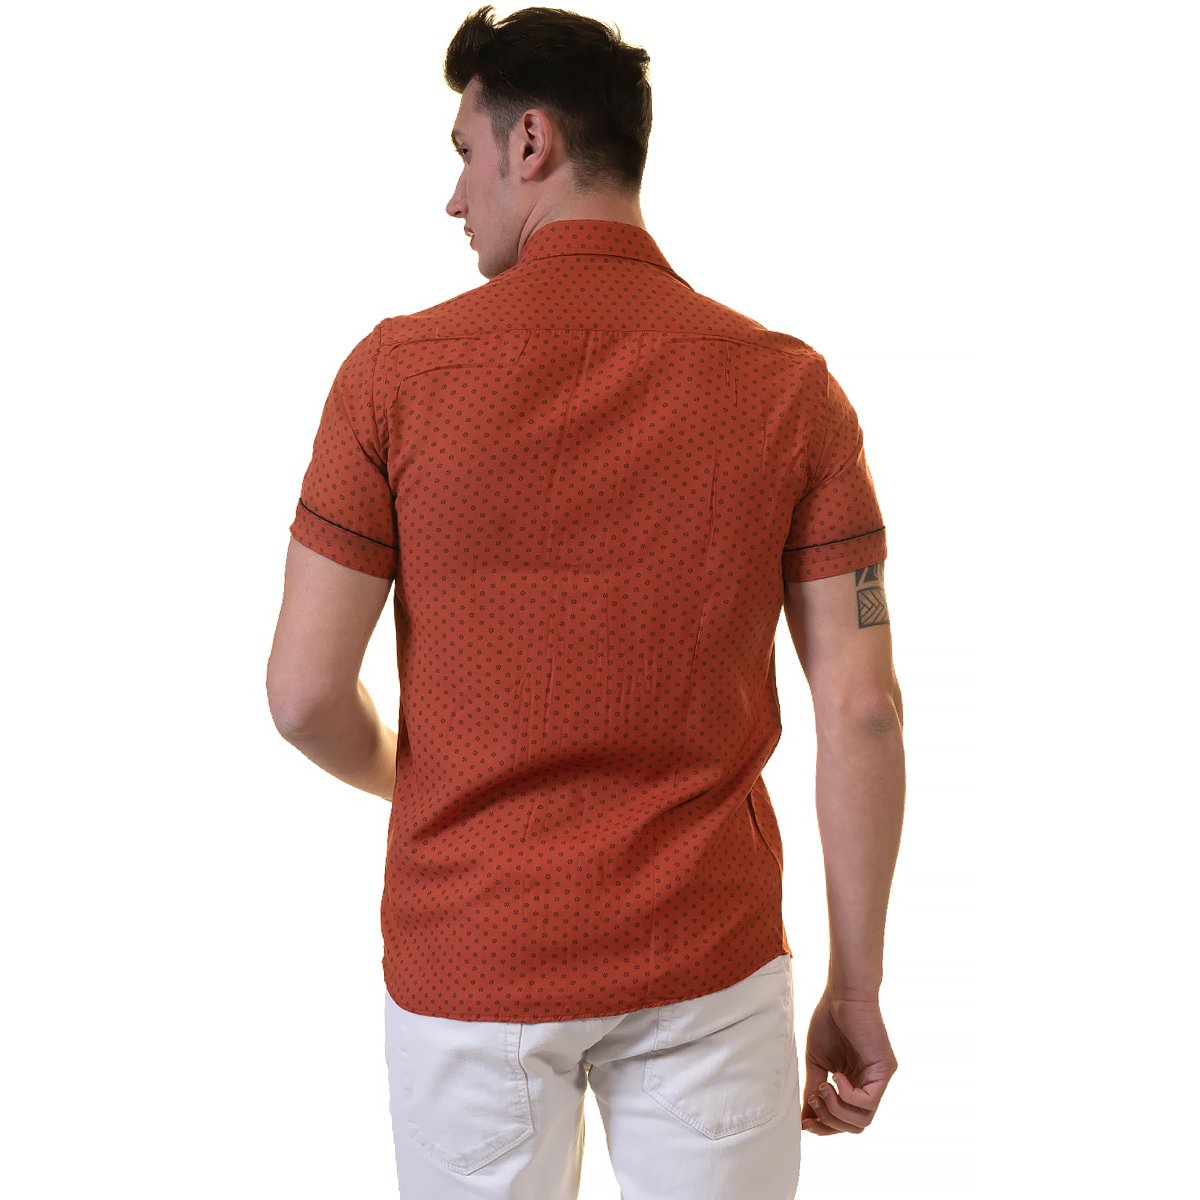 Picture of a Premium Men's Short Sleeve Button Up Shirt in Red back view